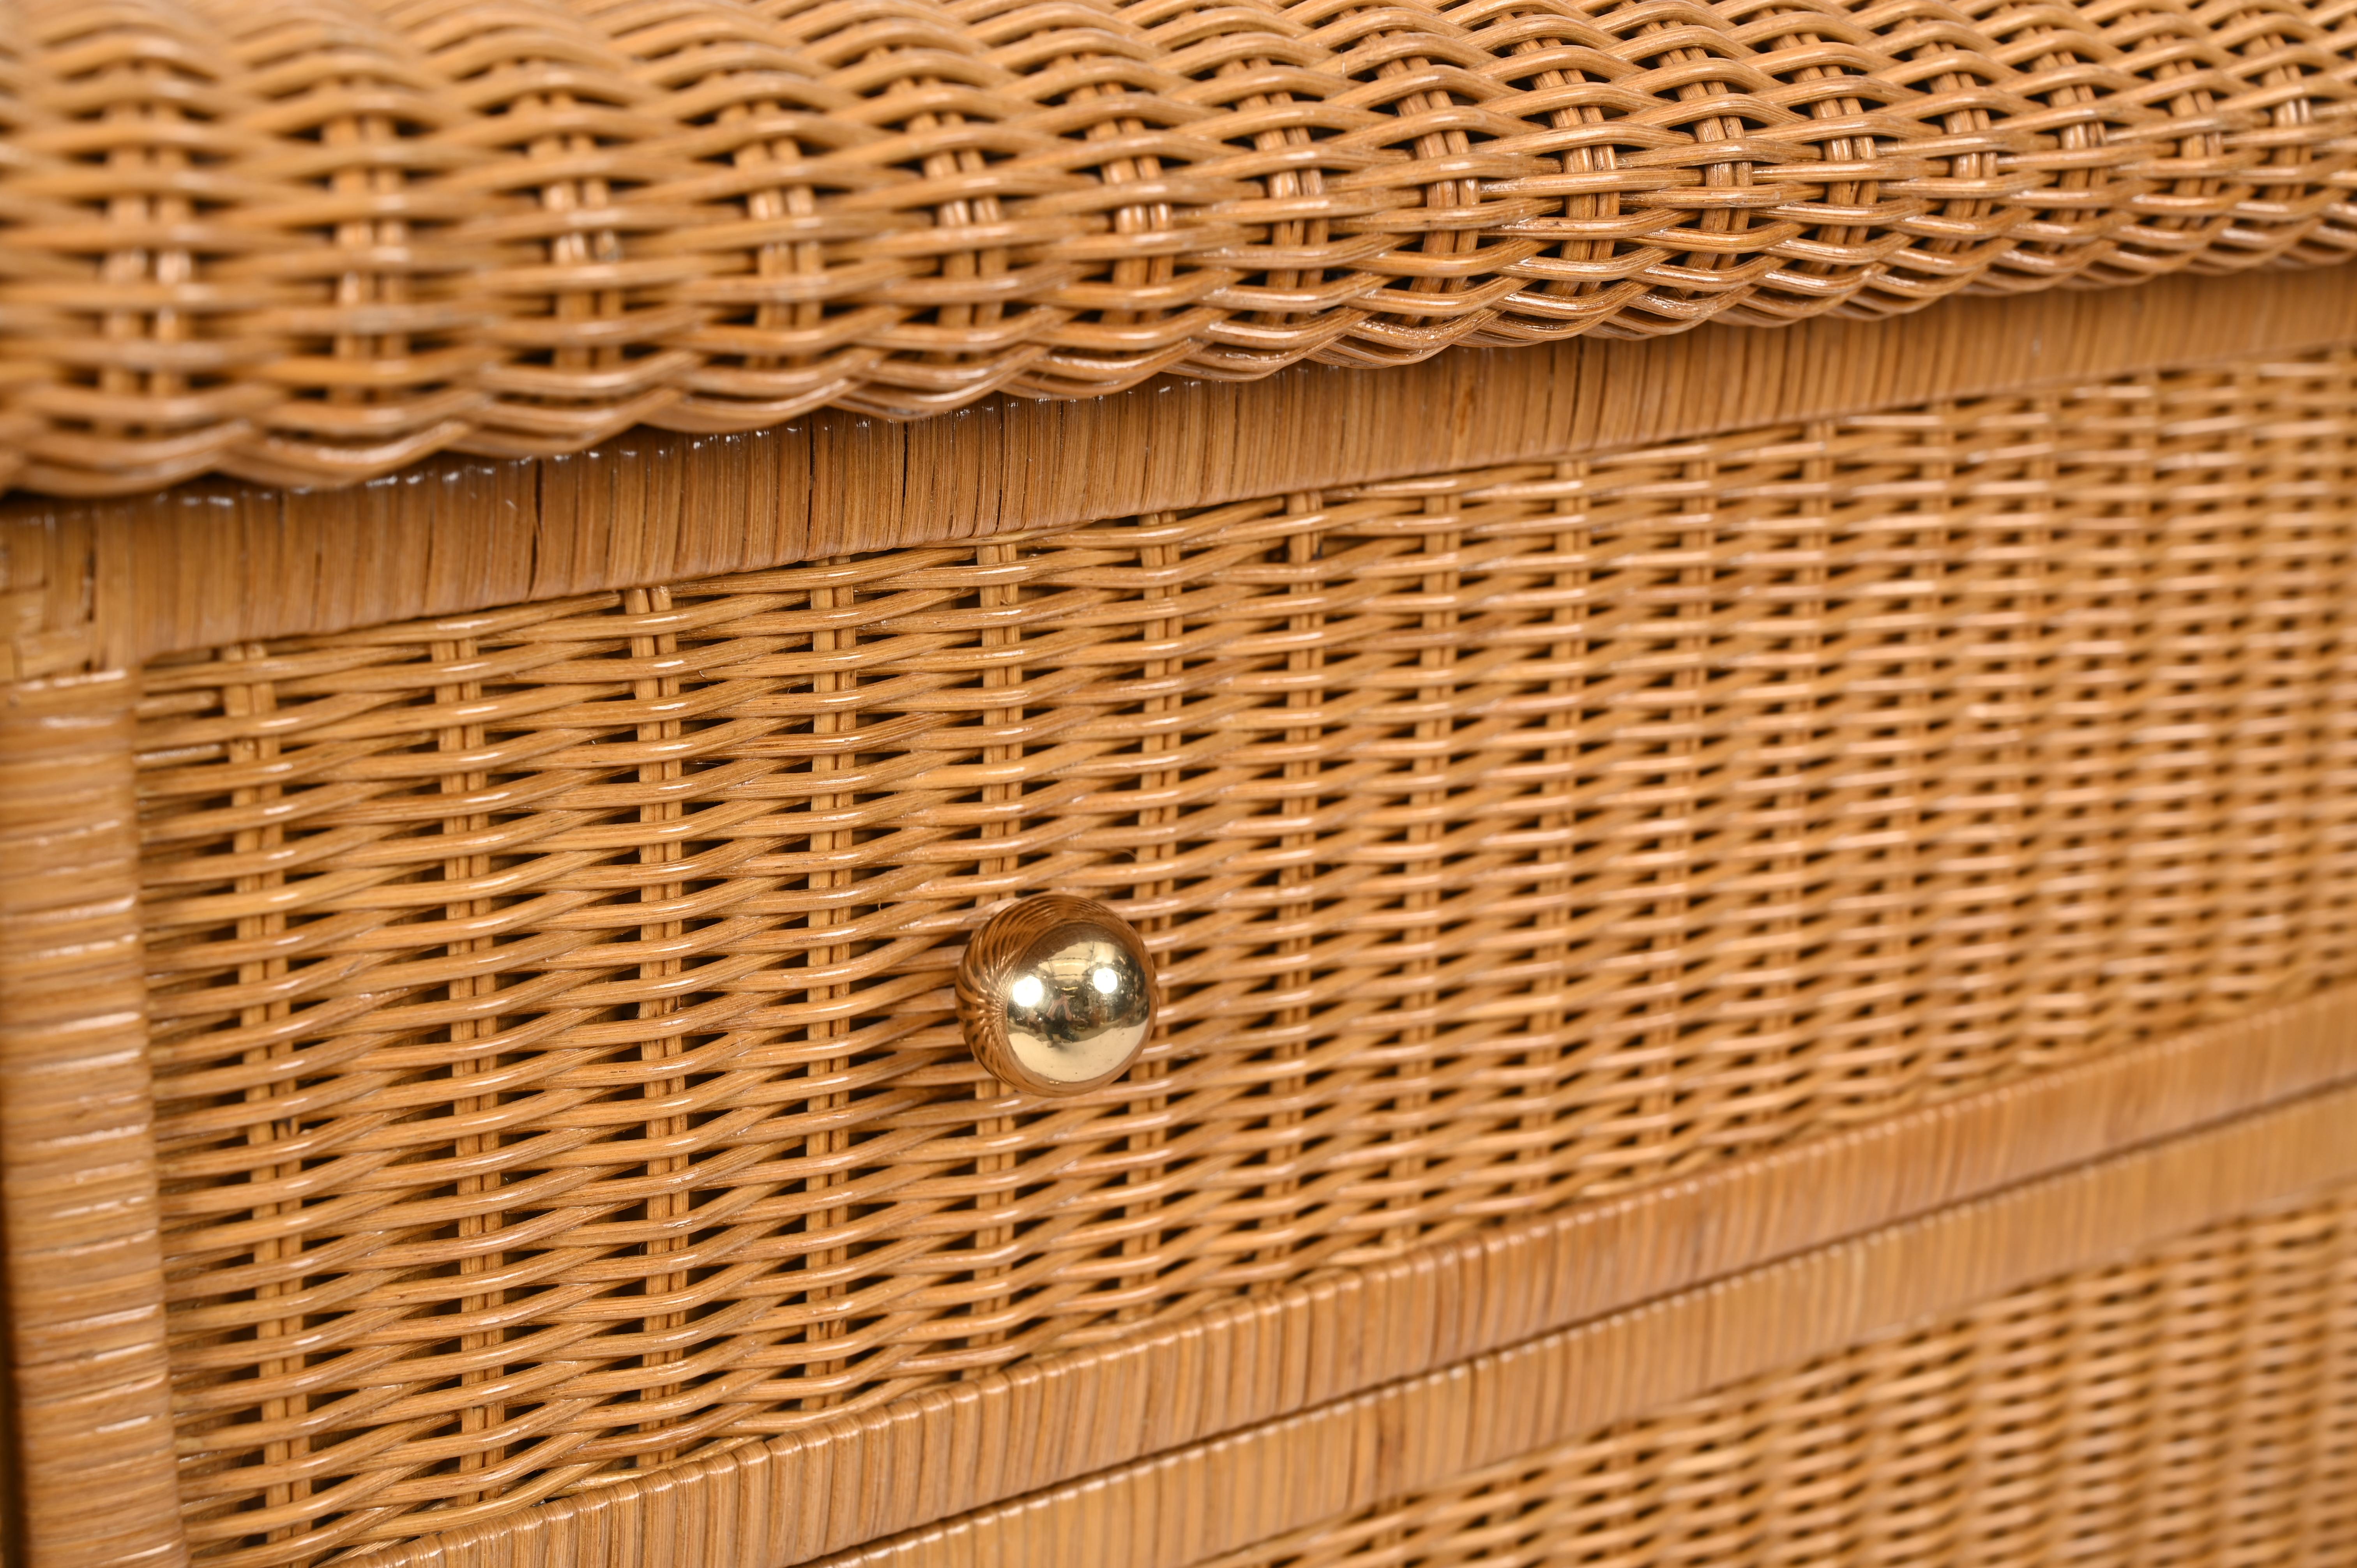 French Riviera Chest of Drawers in Woven Rattan by Vivai del Sud, Italy, 1970s For Sale 2